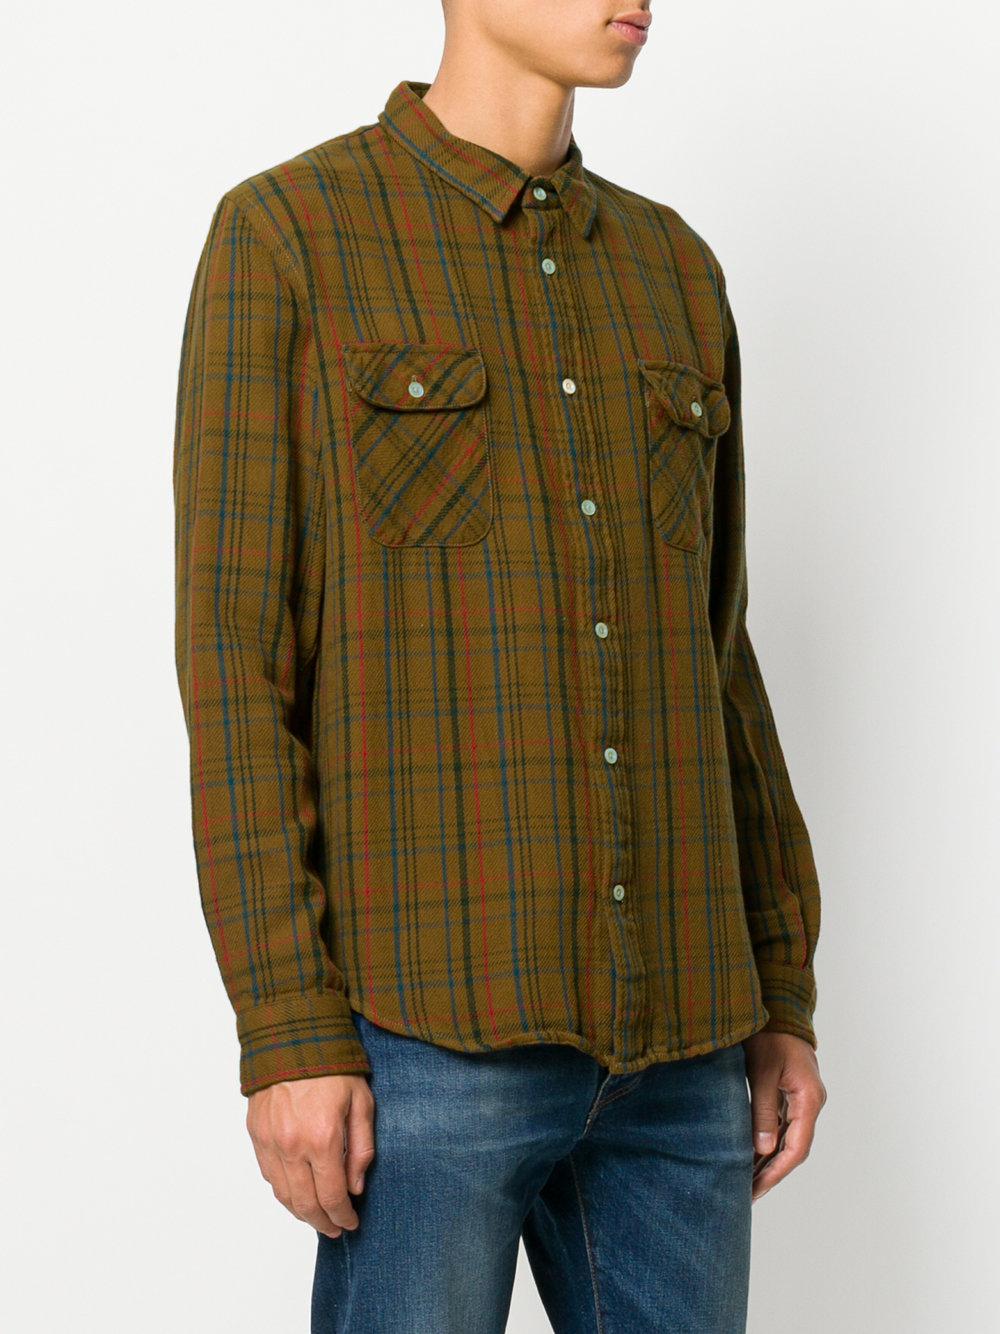 Levi's Cotton Checked Shirt in Brown for Men - Lyst